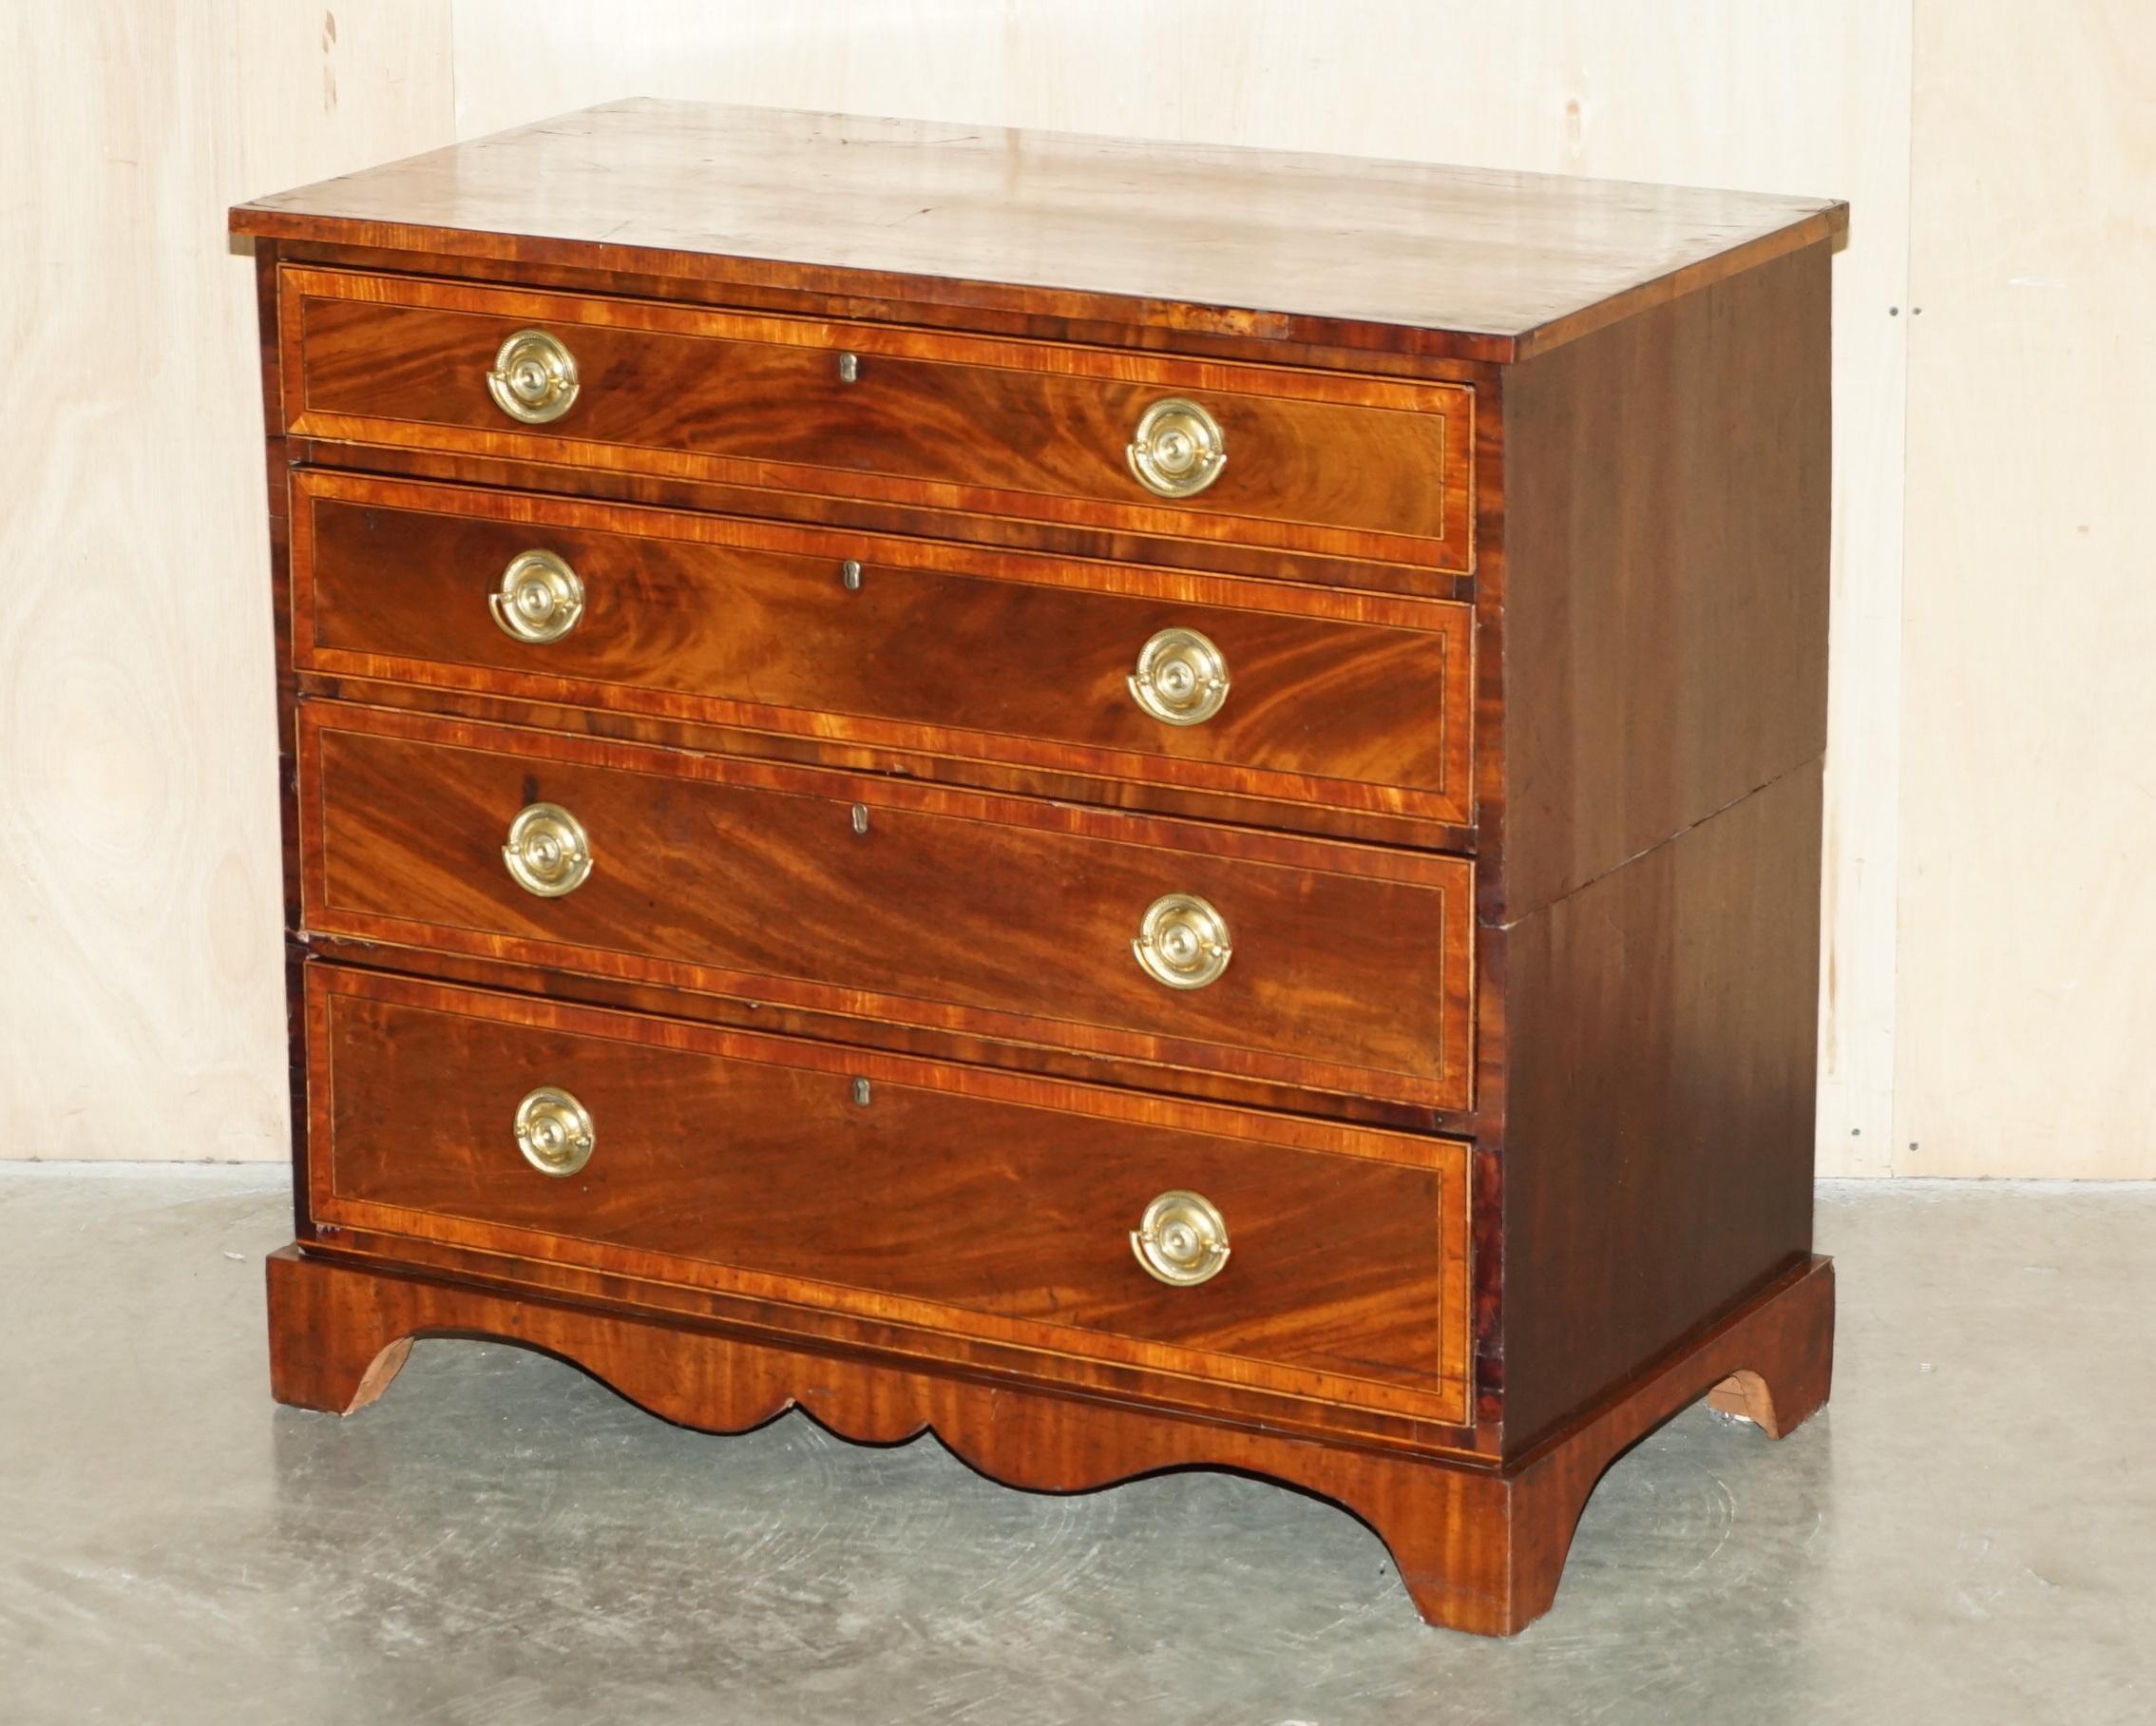 Royal House Antiques

Royal House Antiques is delighted to offer for sale this exceedingly rare circa 1780 Georgian Bachelors Chest of Drawers with baize lined slip writing desk top and slope and second level stationary or wash station made in the